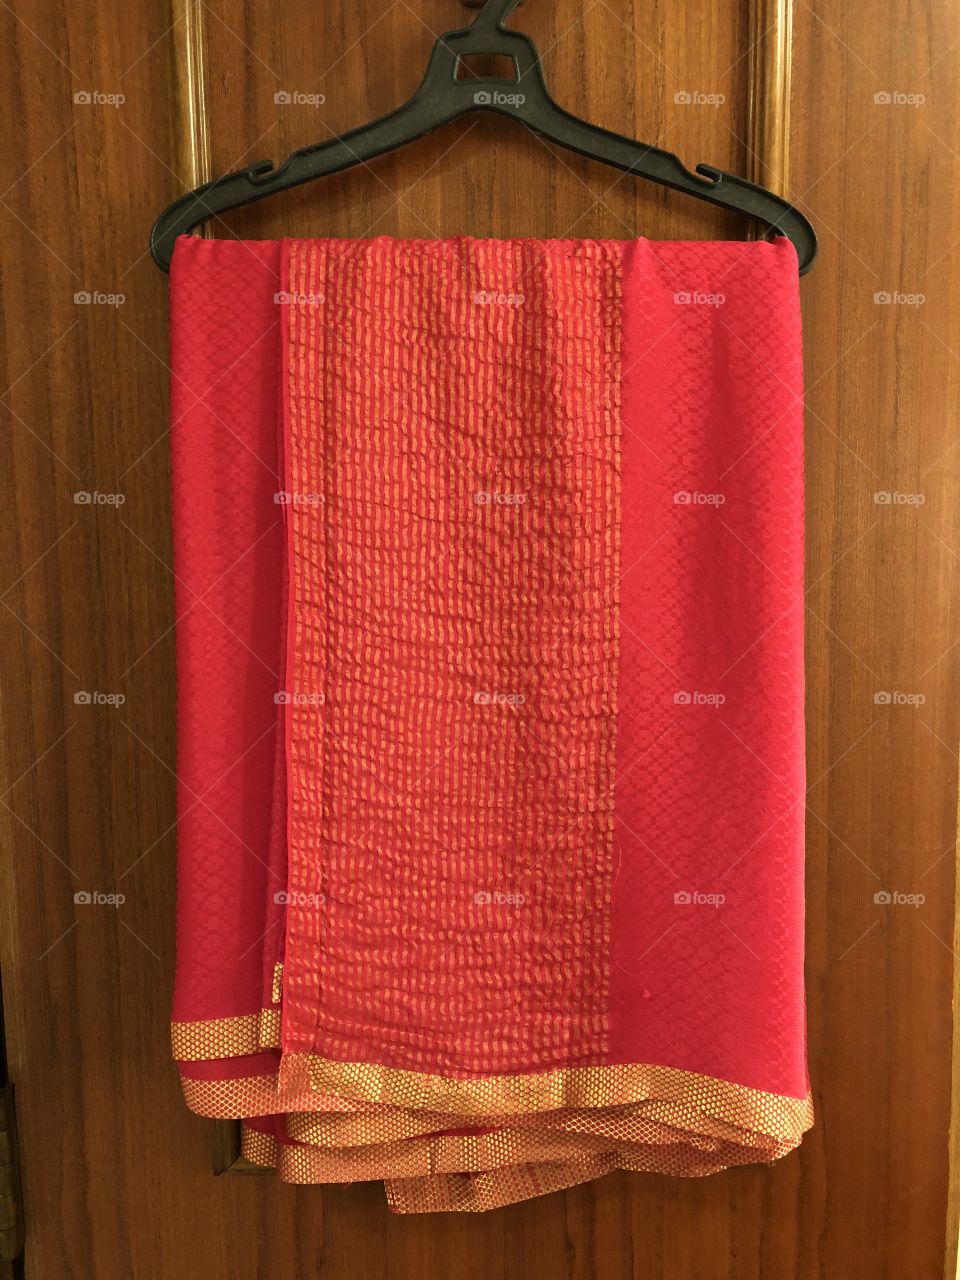 Pink saree draped on a hanger. Long garment with gold accent edging. Indian silk material. 2018.